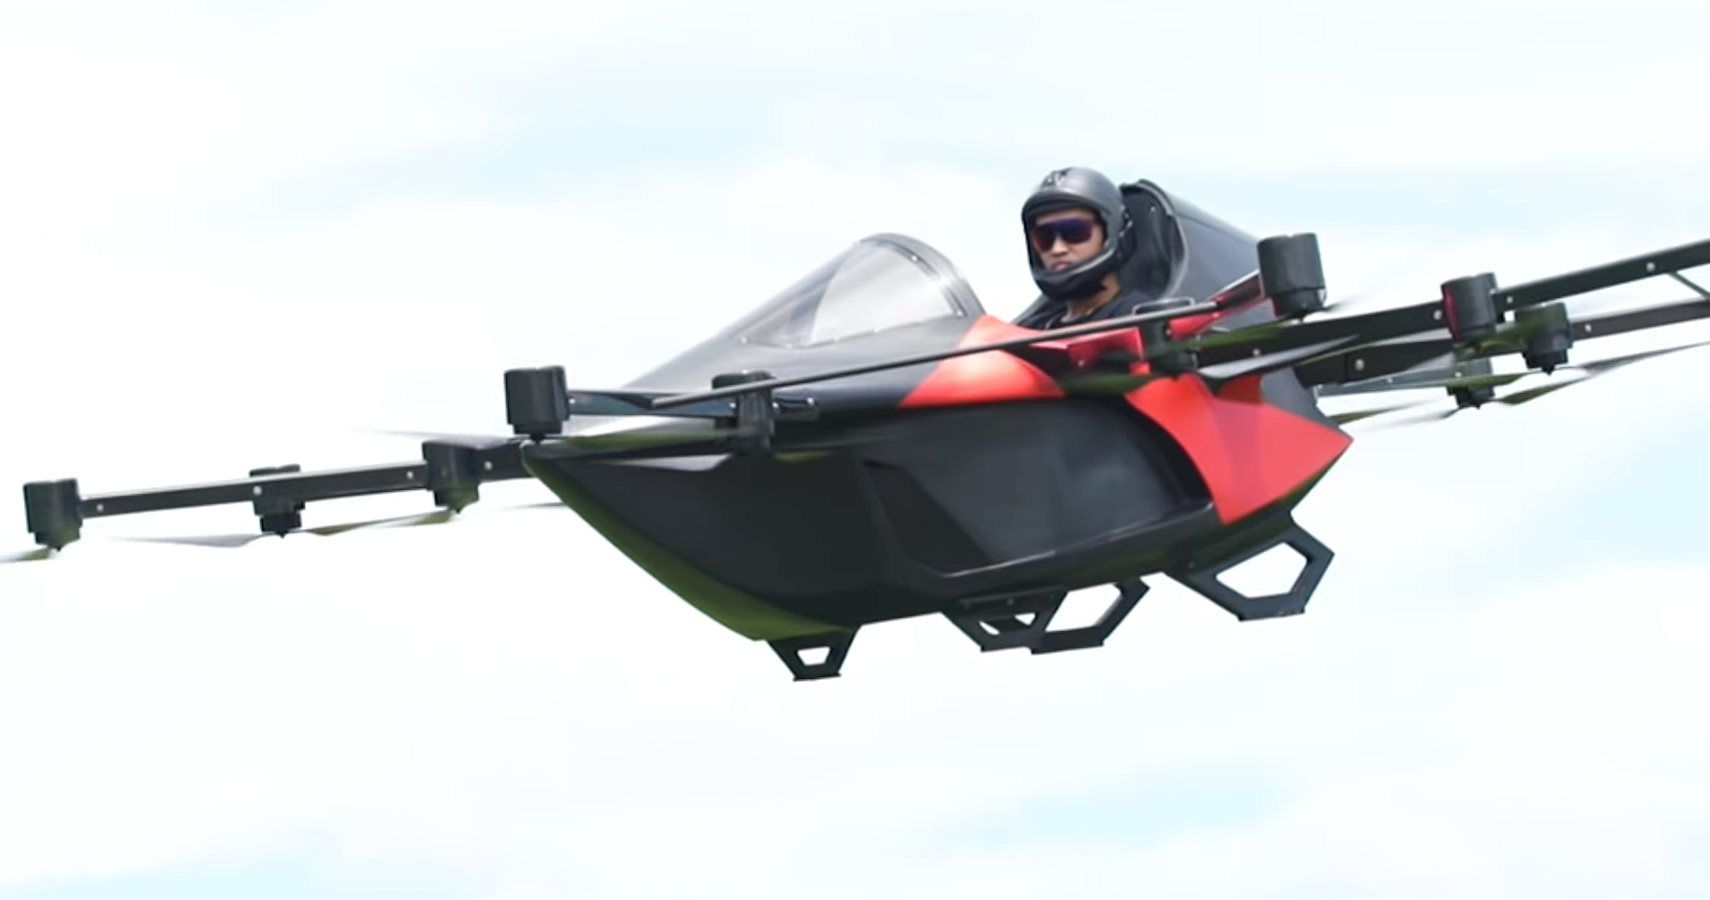 Philippines Inventor Wants To Fund Flying Sports Car